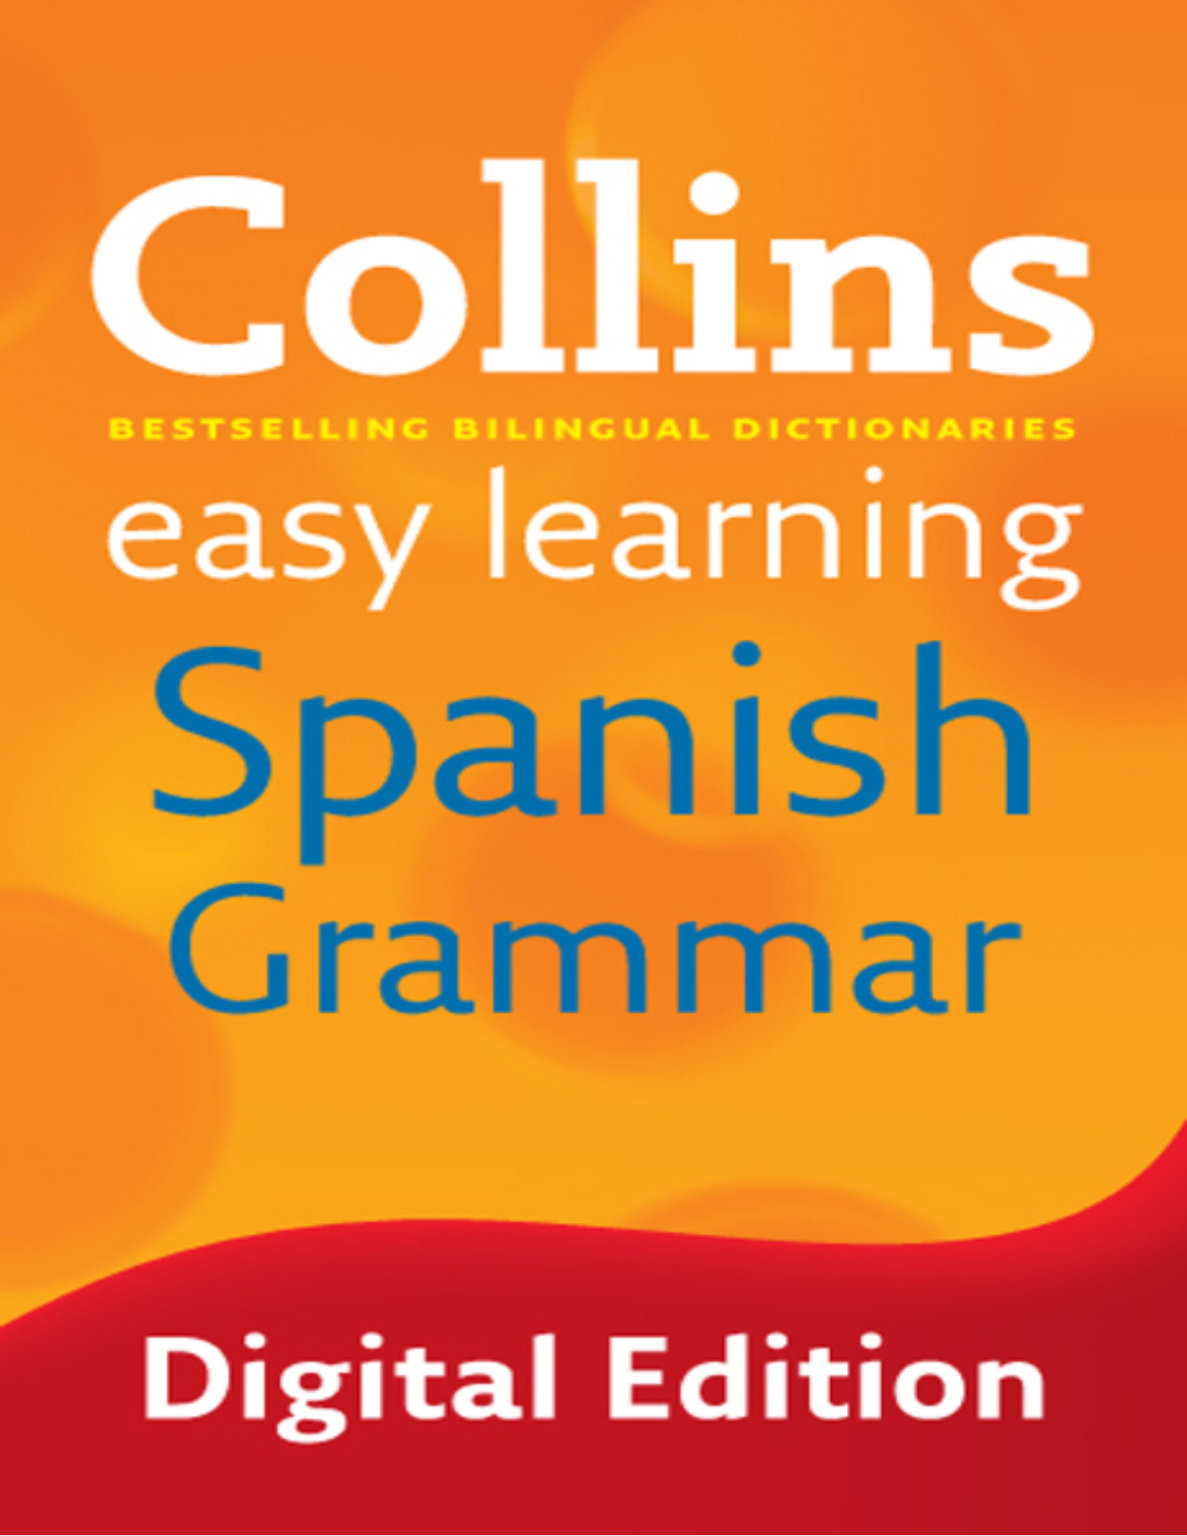 Rich results on Google's SERP when searching for ''Collins-Easy-Learning-Spanish-Grammar-Book''